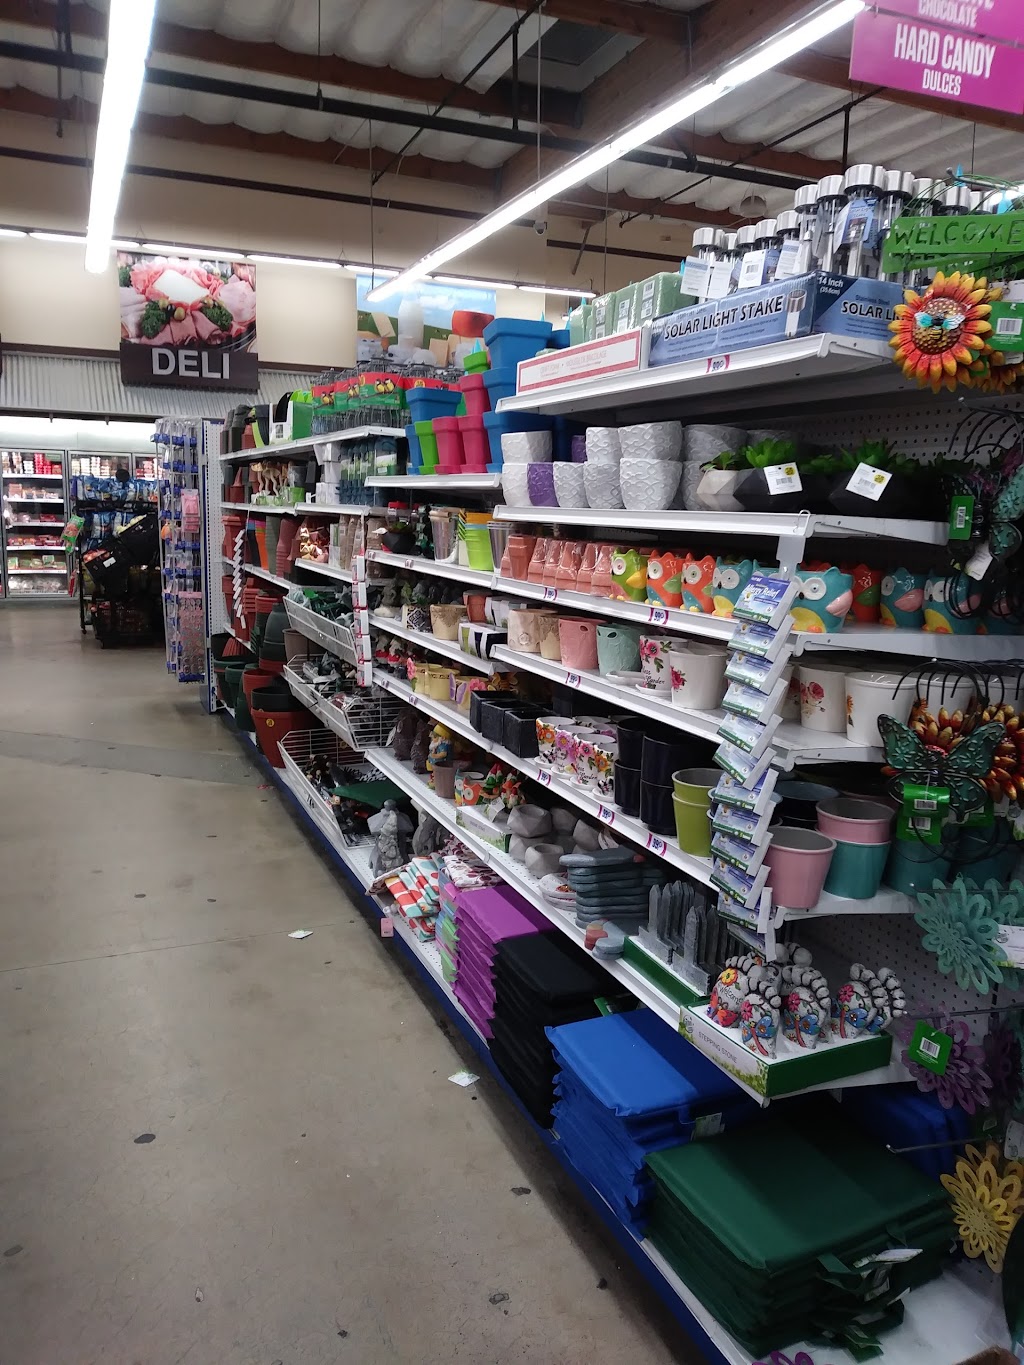 99 Cents Only Stores | 2680 Jensen Ave, Sanger, CA 93657, USA | Phone: (559) 875-7026